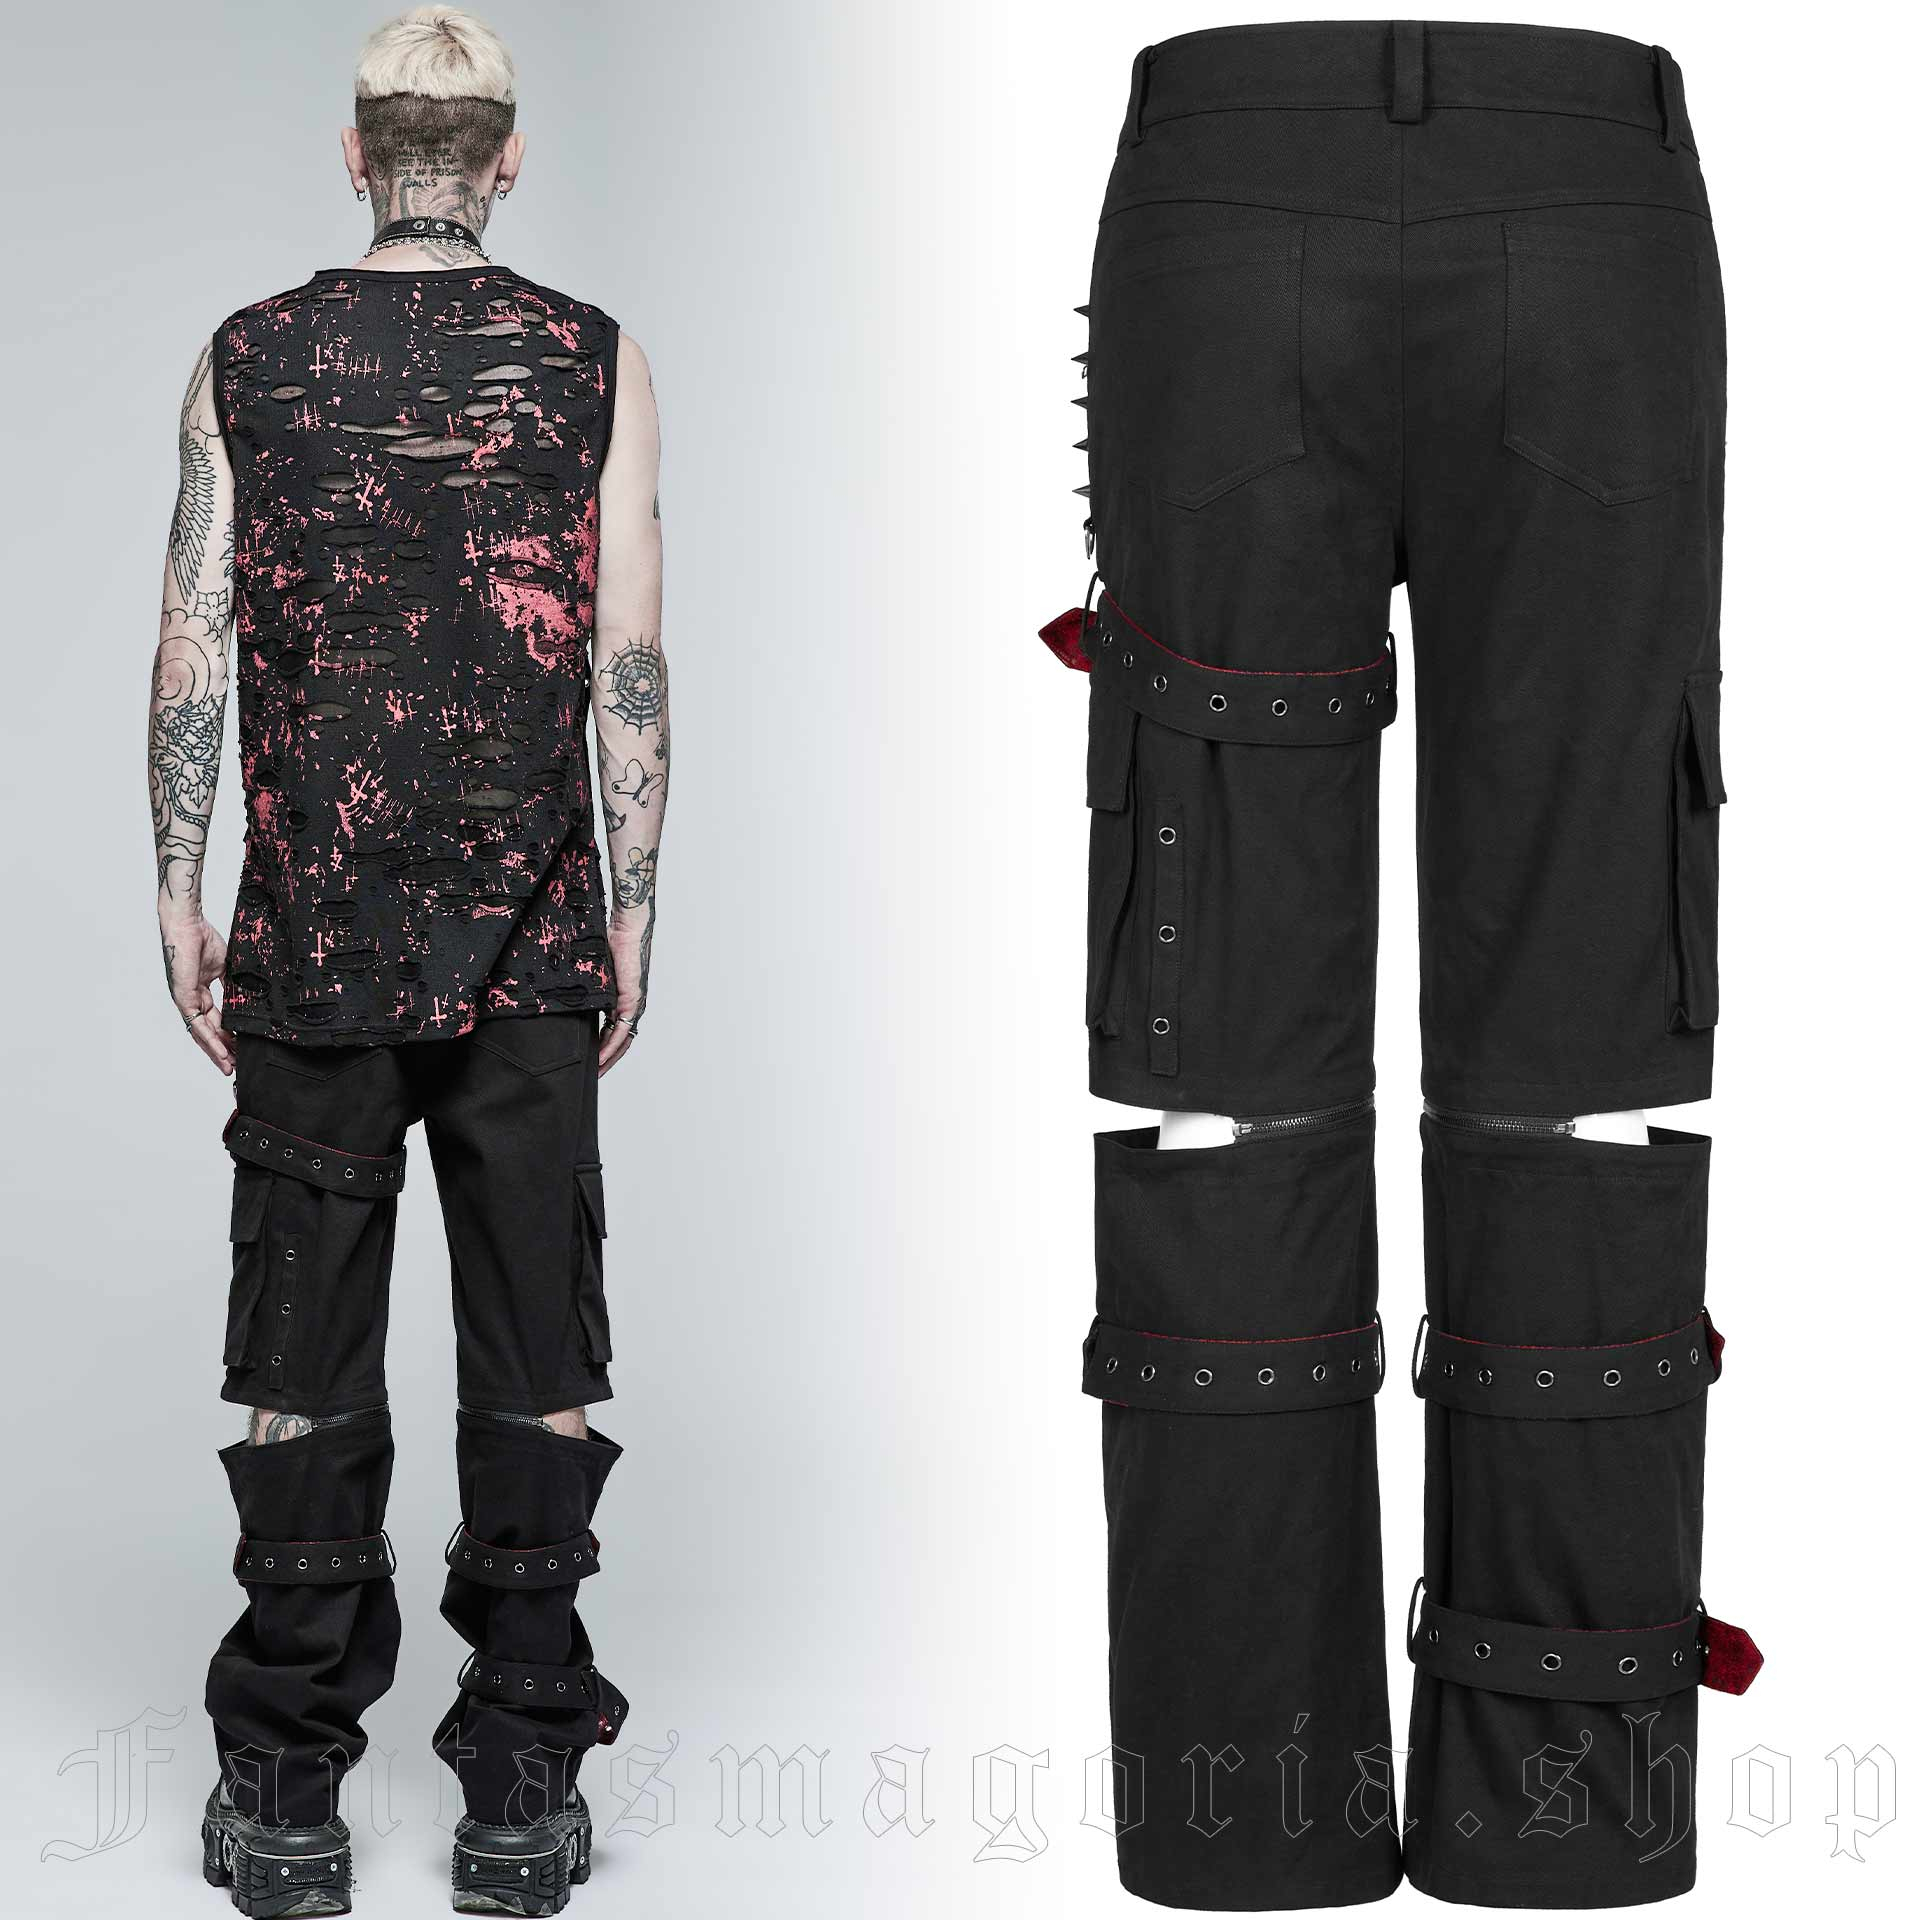 Mad Man Transformer Trousers-Shorts WK-500 by Punk Rave brand